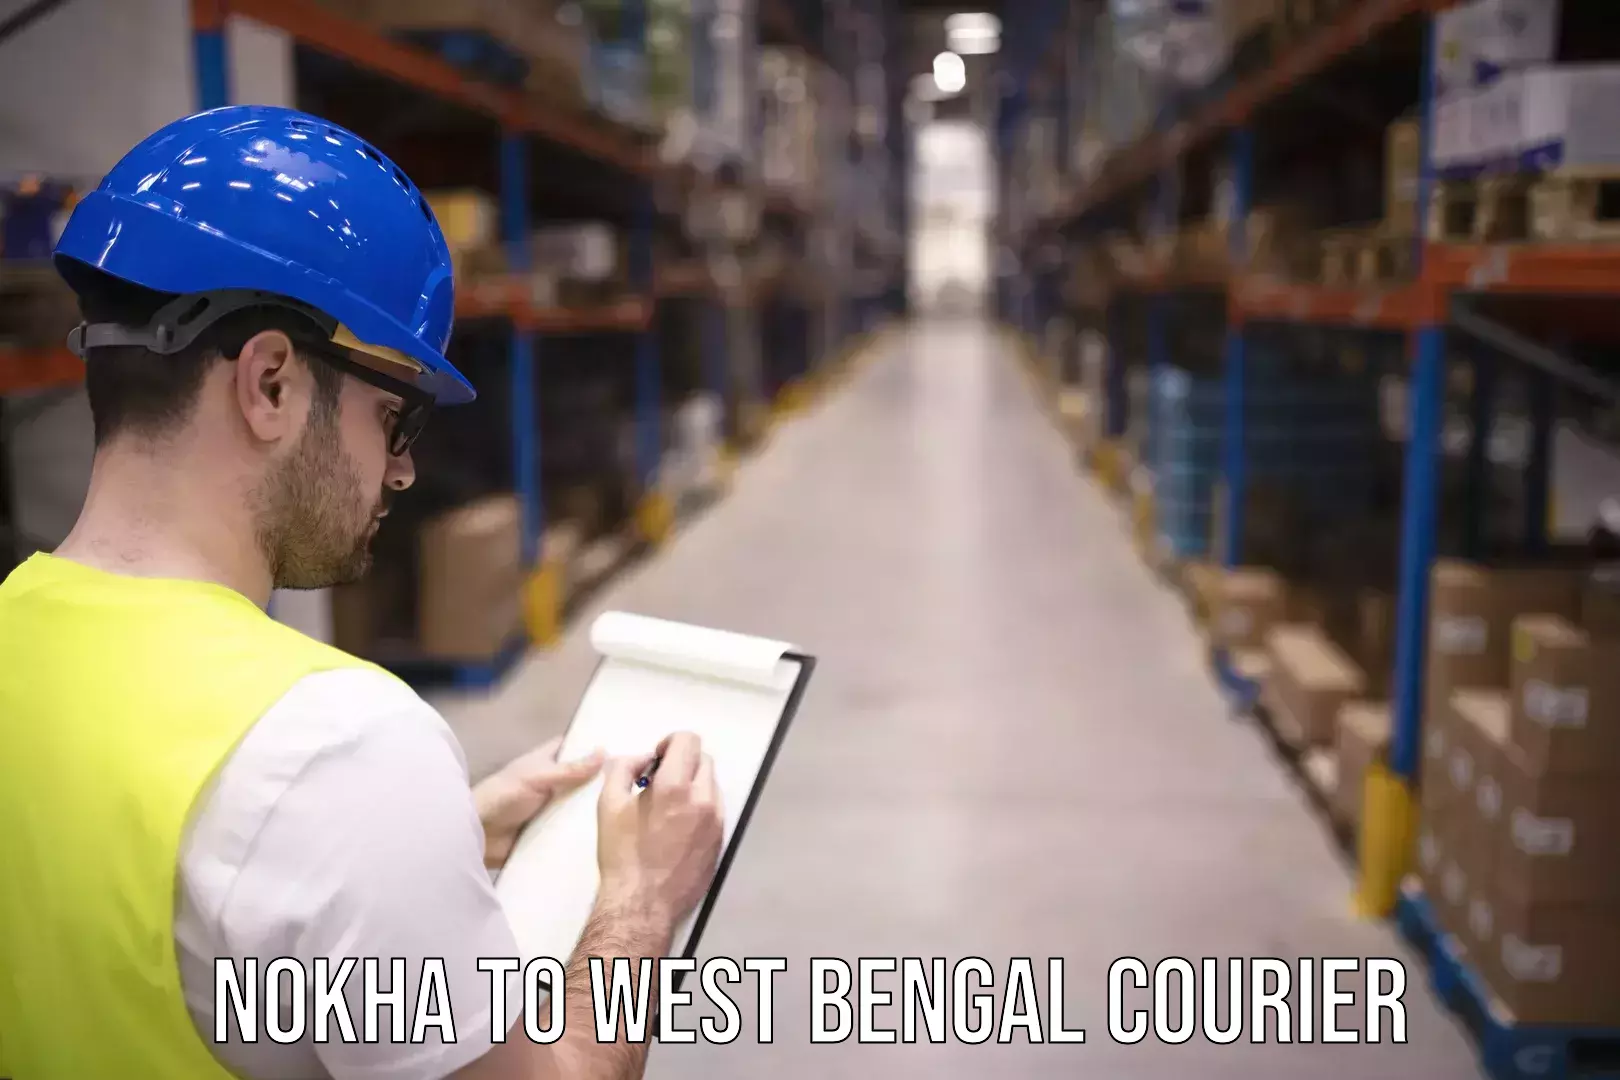 Courier app Nokha to West Bengal